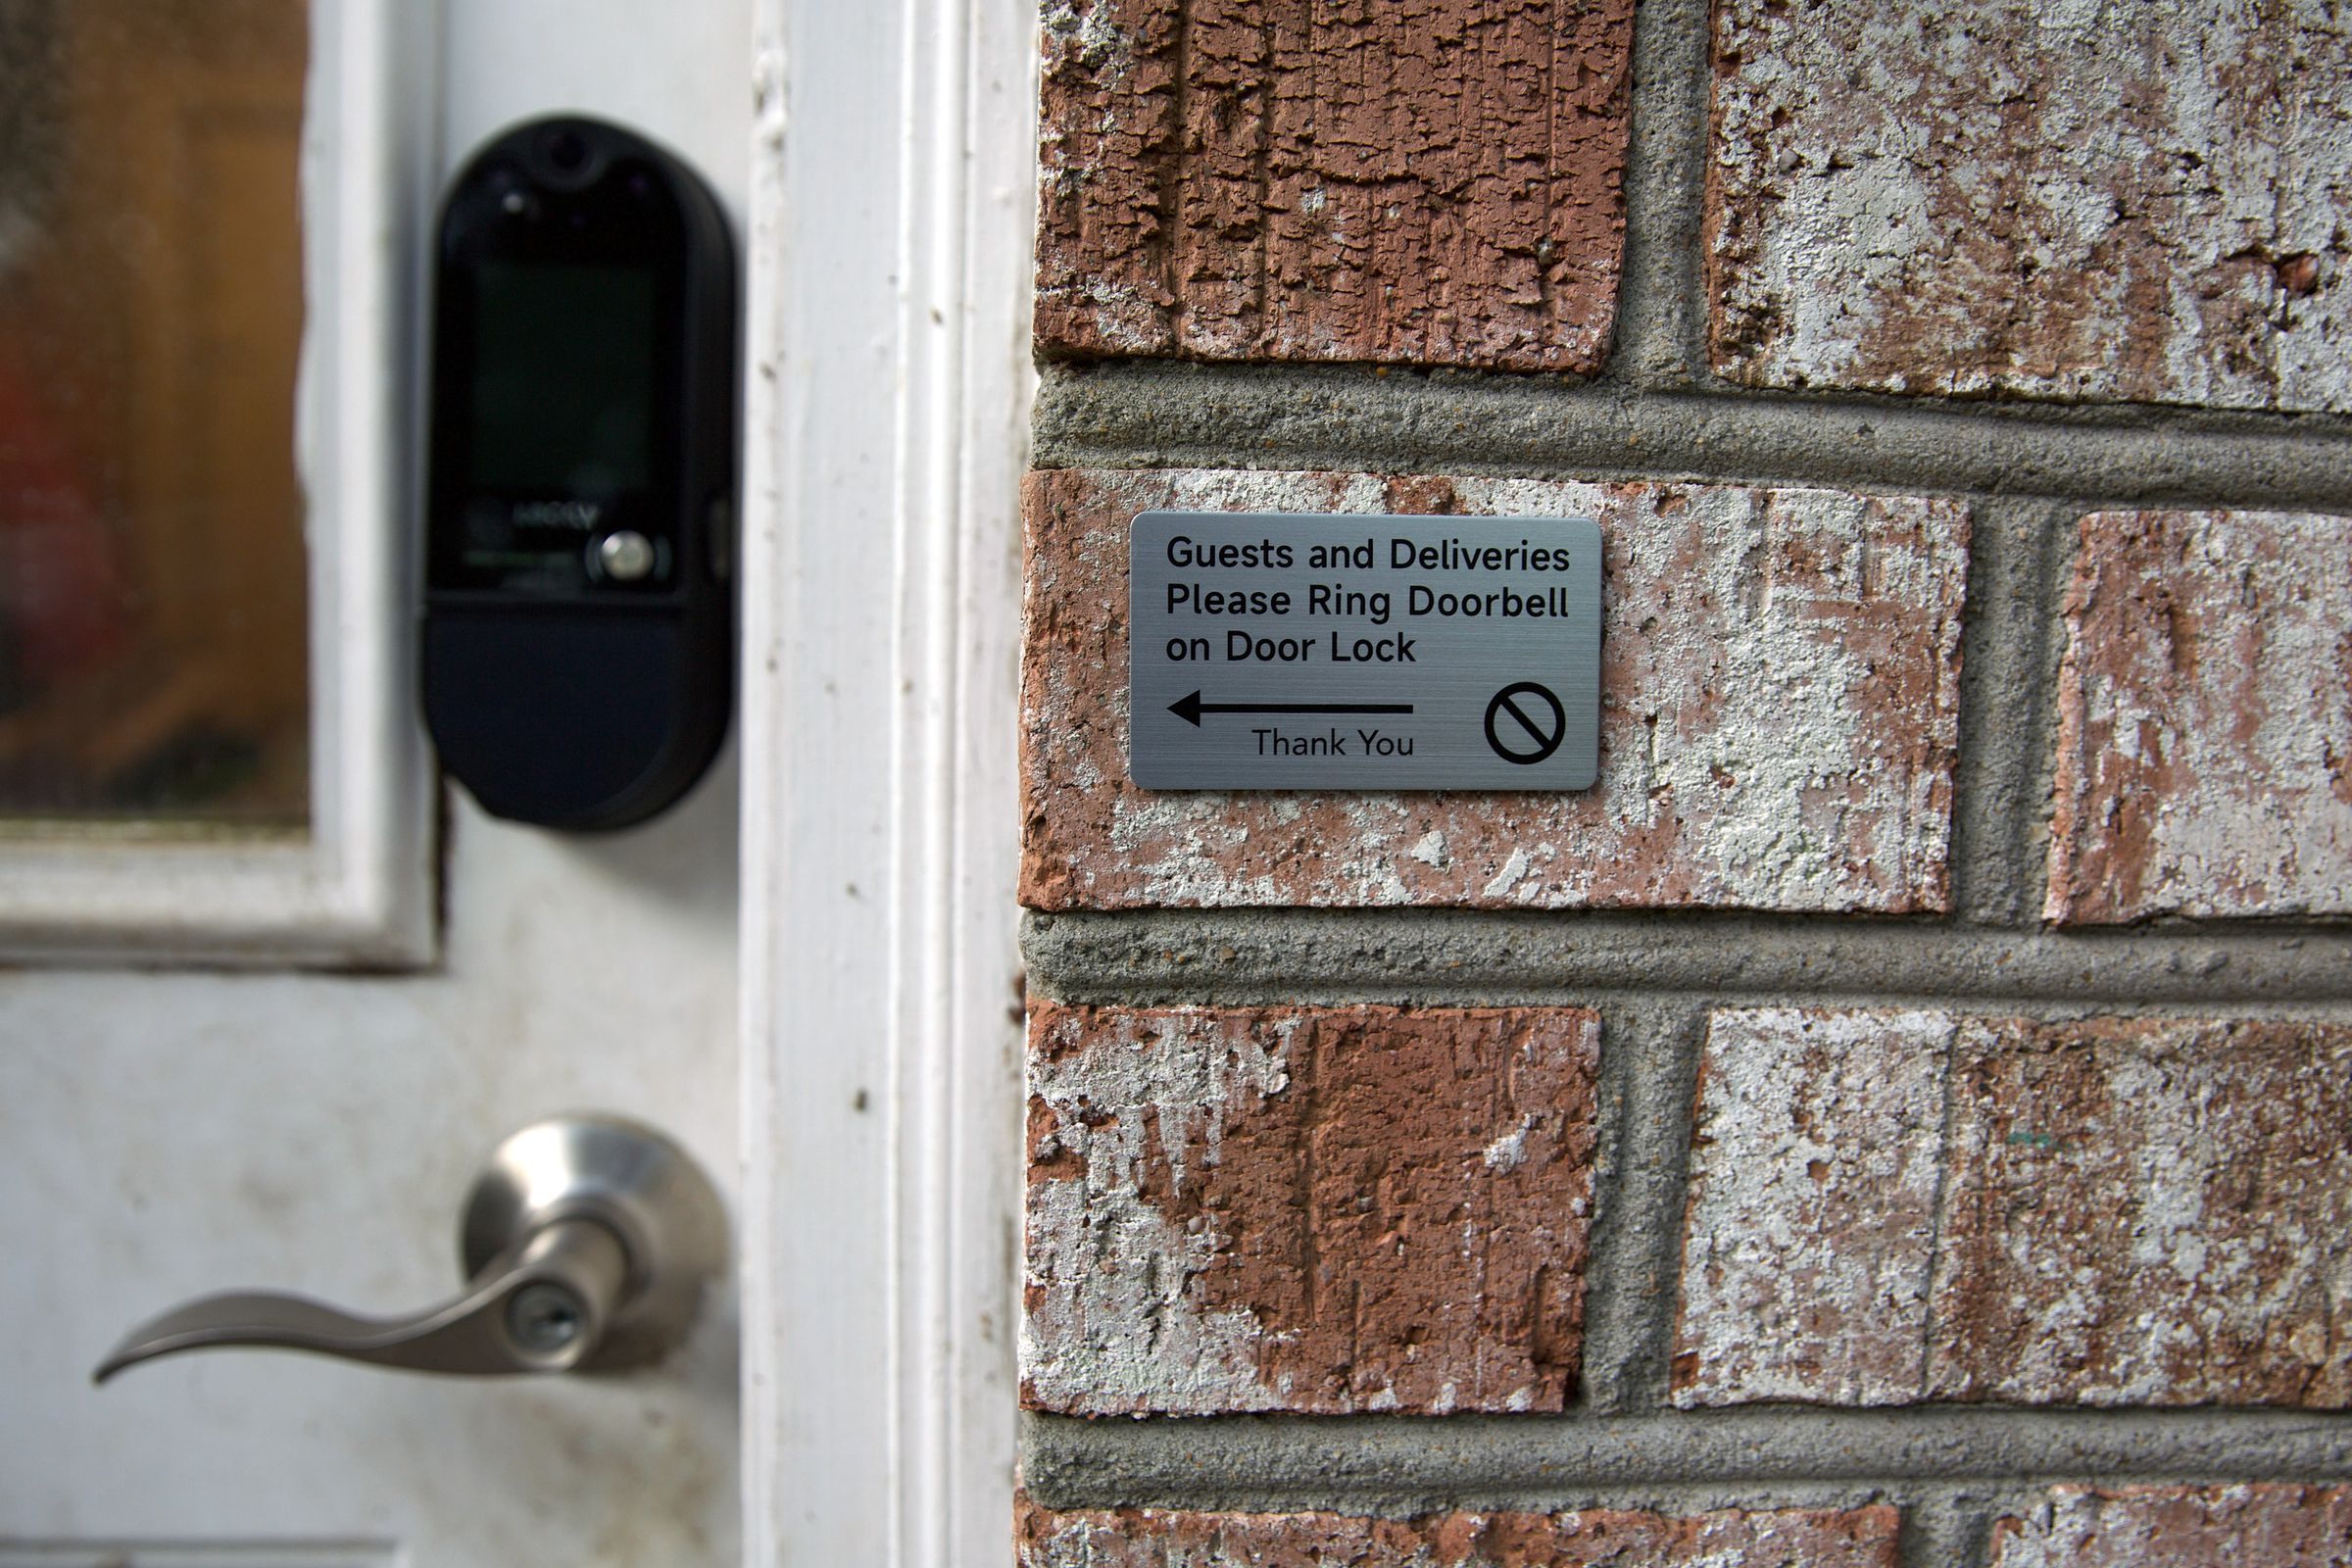 An image of a sign reading “Guests and Deliveries Please Ring Doorbell on Door Lock,” with an arrow pointing towards the Lockly Vision Elite installed in a door.